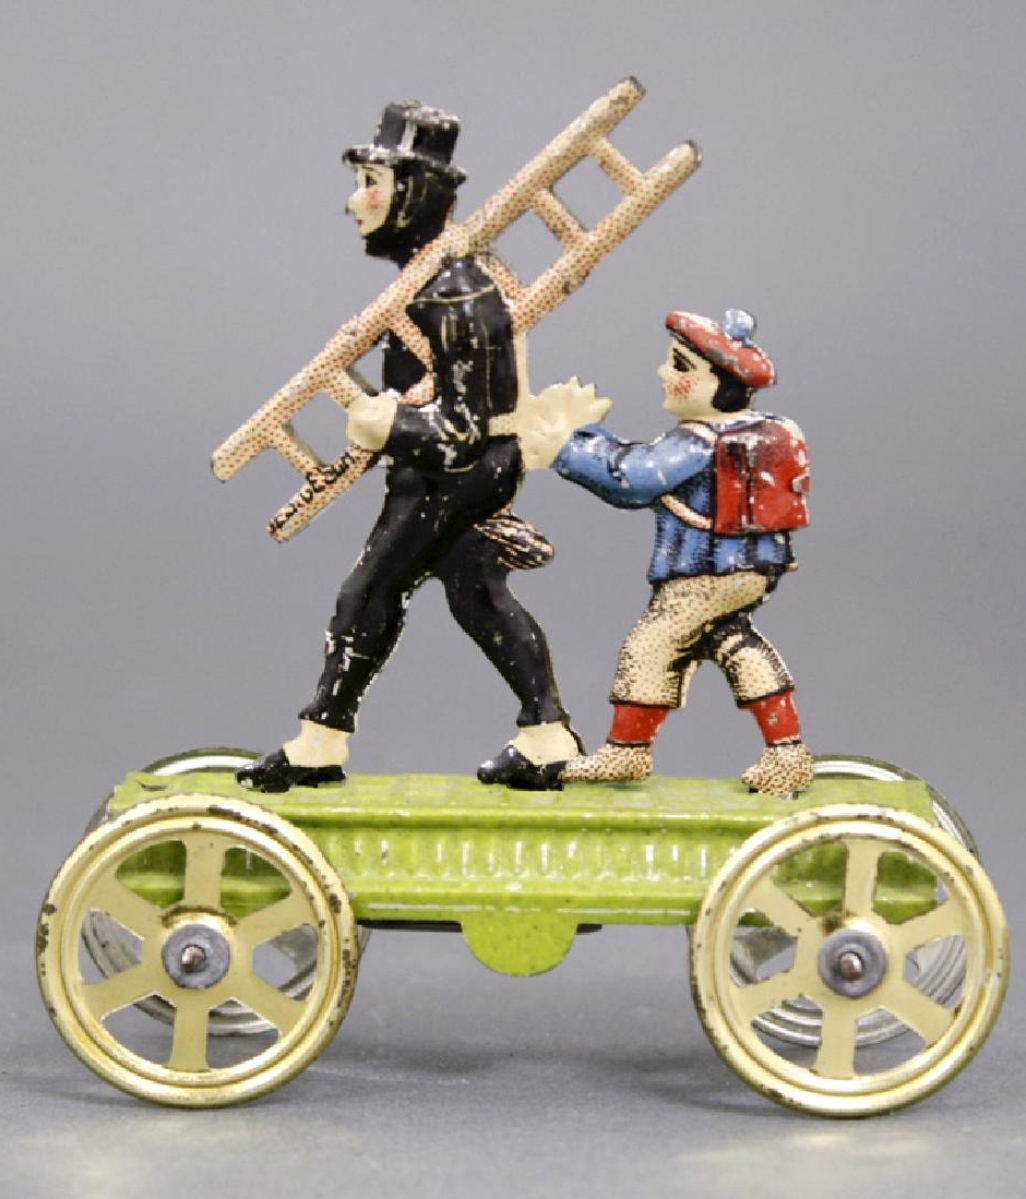 A popular penny toy was Chimney Sweep and Apprentice, by J.P. Meier Co., Germany, tin, circa 1900, that was formerly in the Pressland collection. In mint condition, it sold to a phone bidder for $8,400, almost double the high estimate.